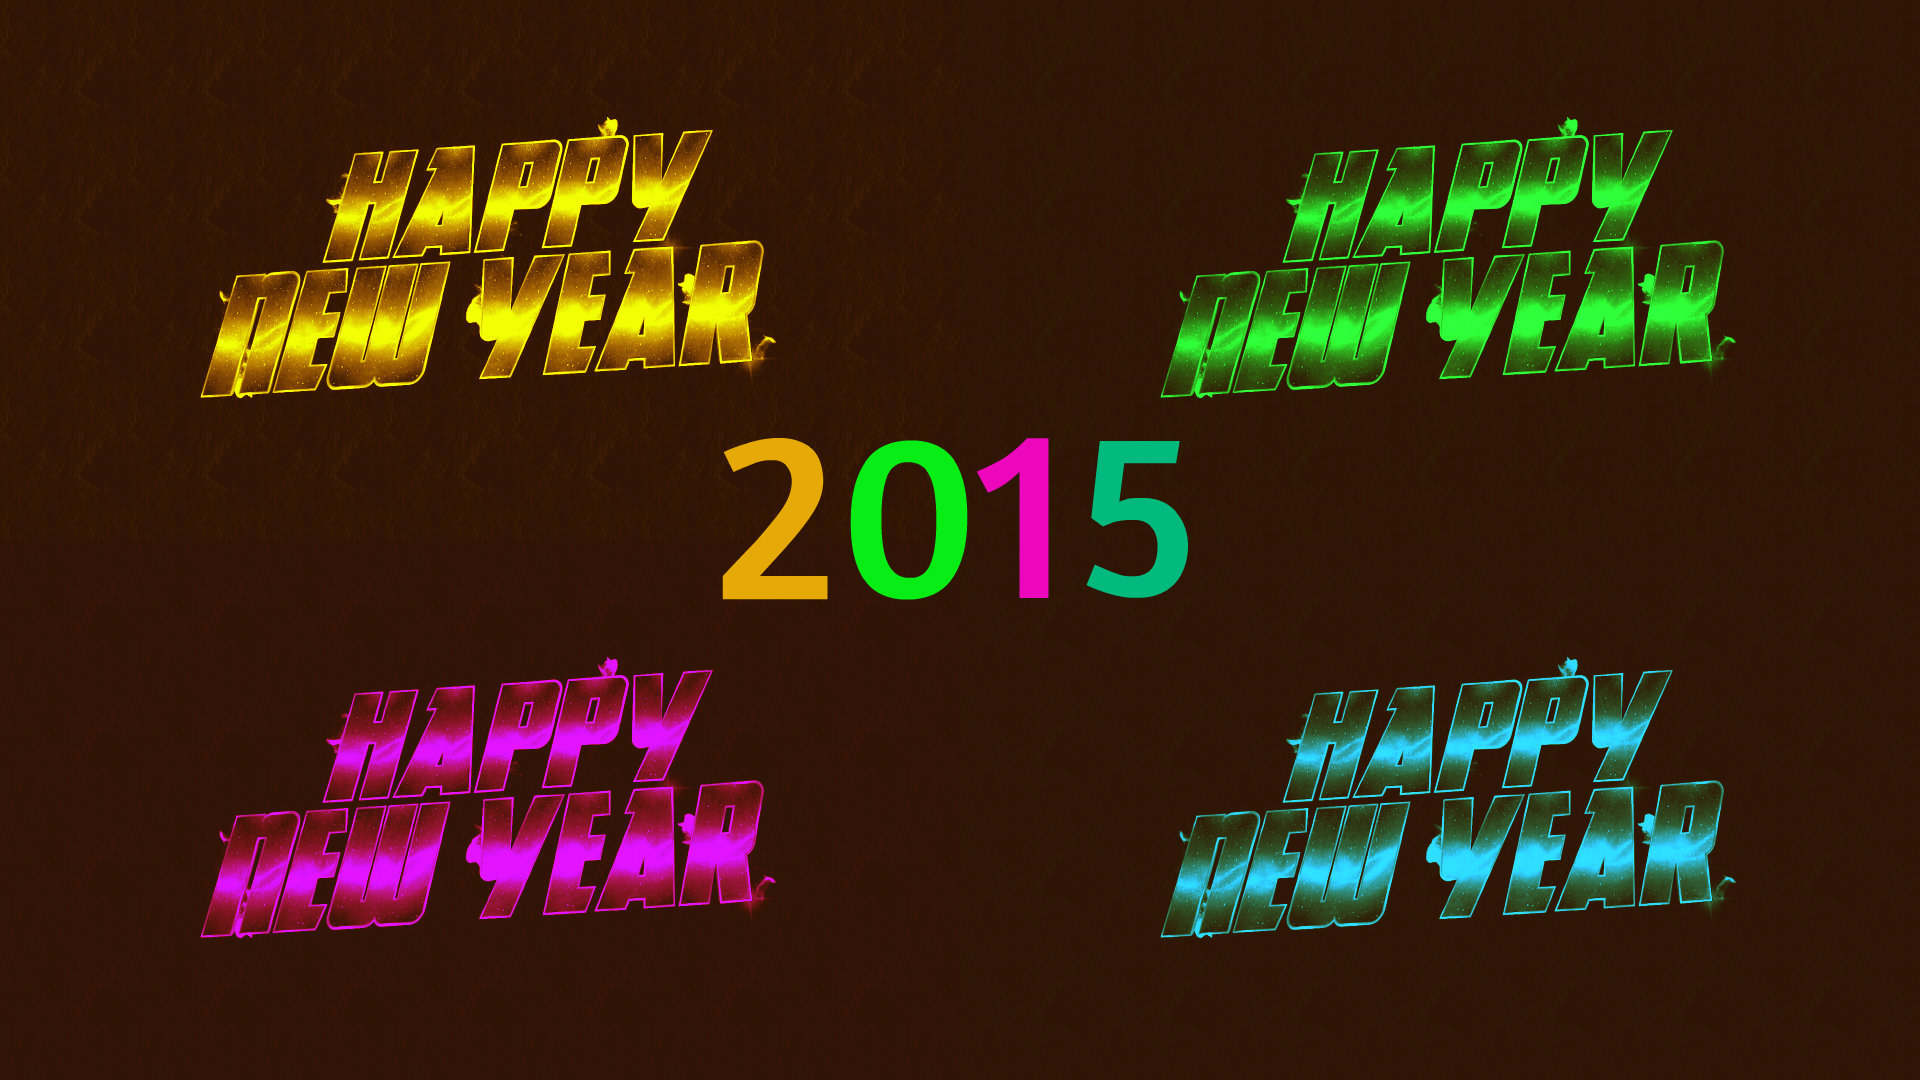 Download 1080p New Year 2015 desktop wallpaper ID:156236 for free